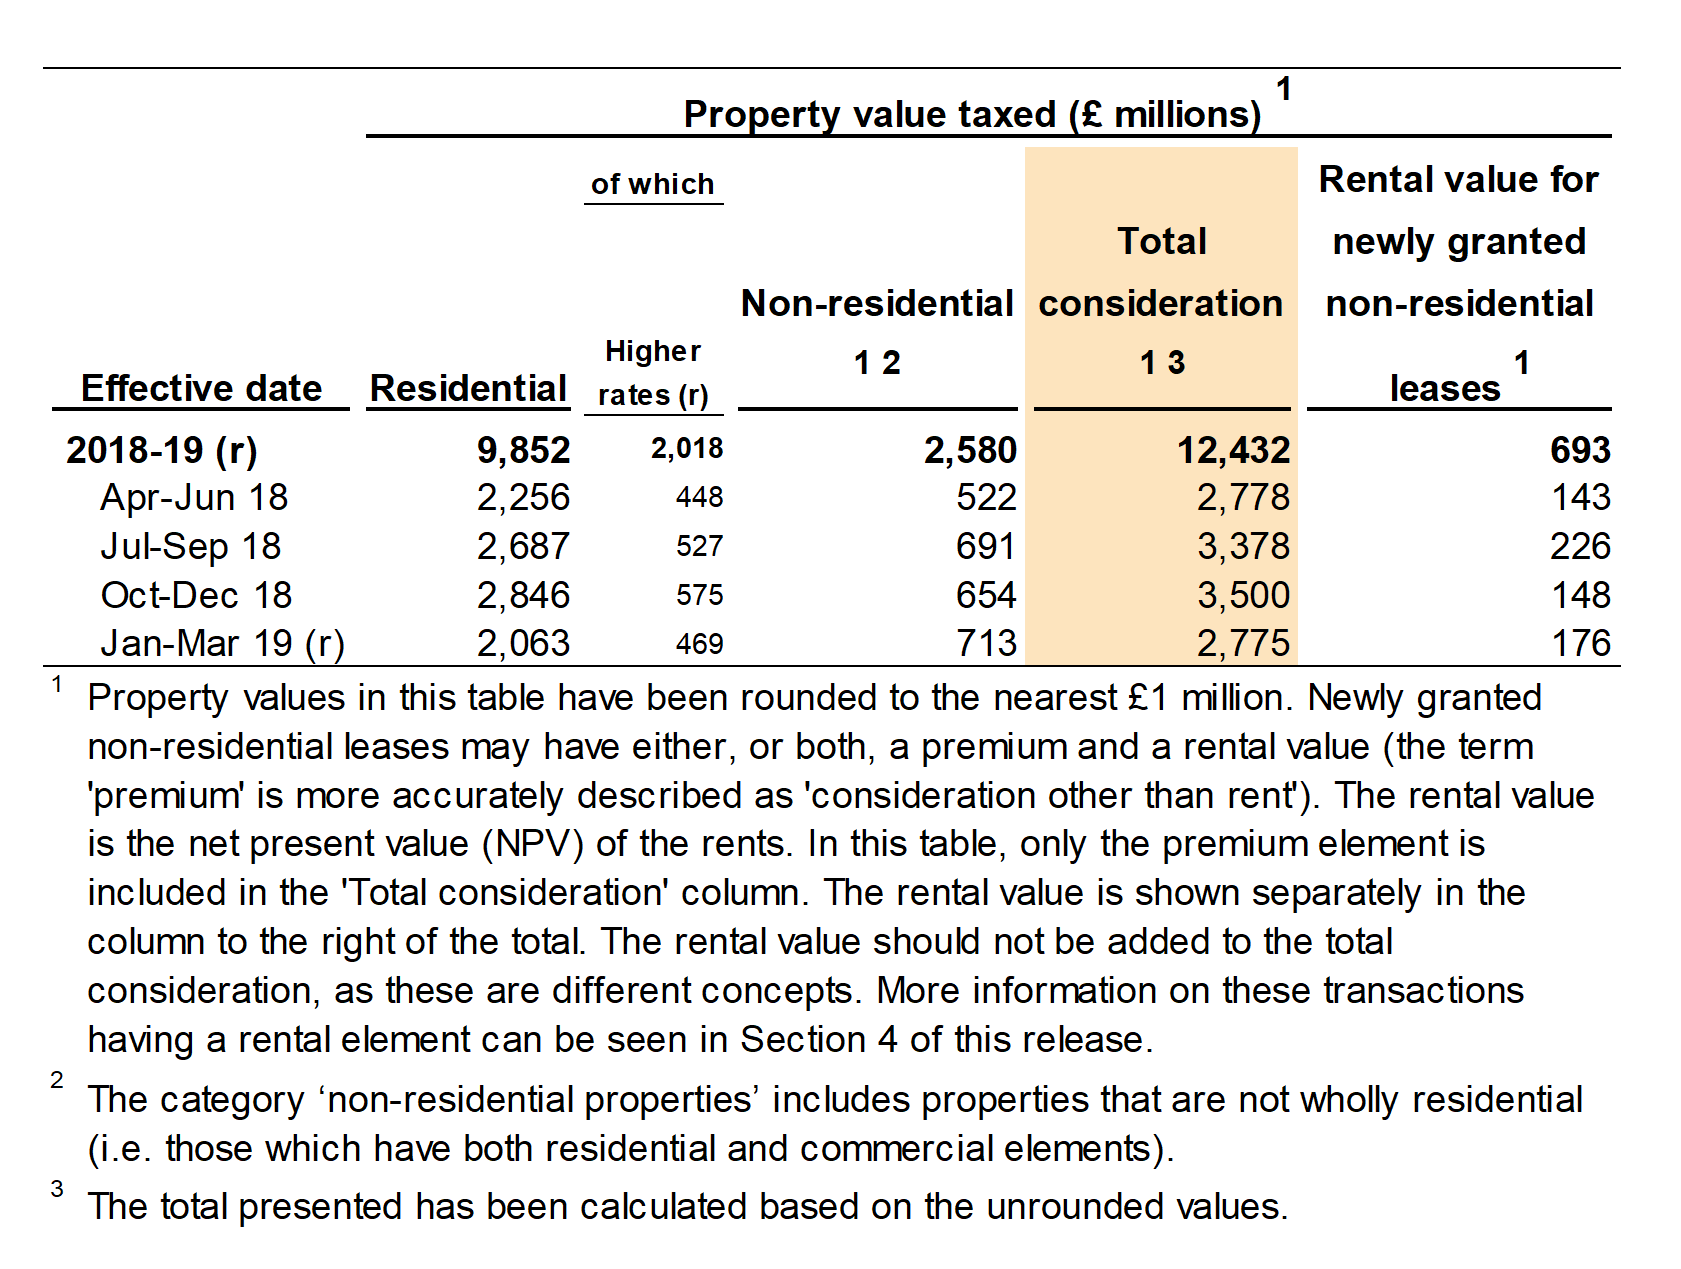 Figure 2.3 shows the value of properties subject to LTT, by the quarter and year in which the transactions were effective. Figure 2.3 also shows a breakdown for residential and non-residential transactions, and separate figures for the rental value of newly granted non-residential leases.